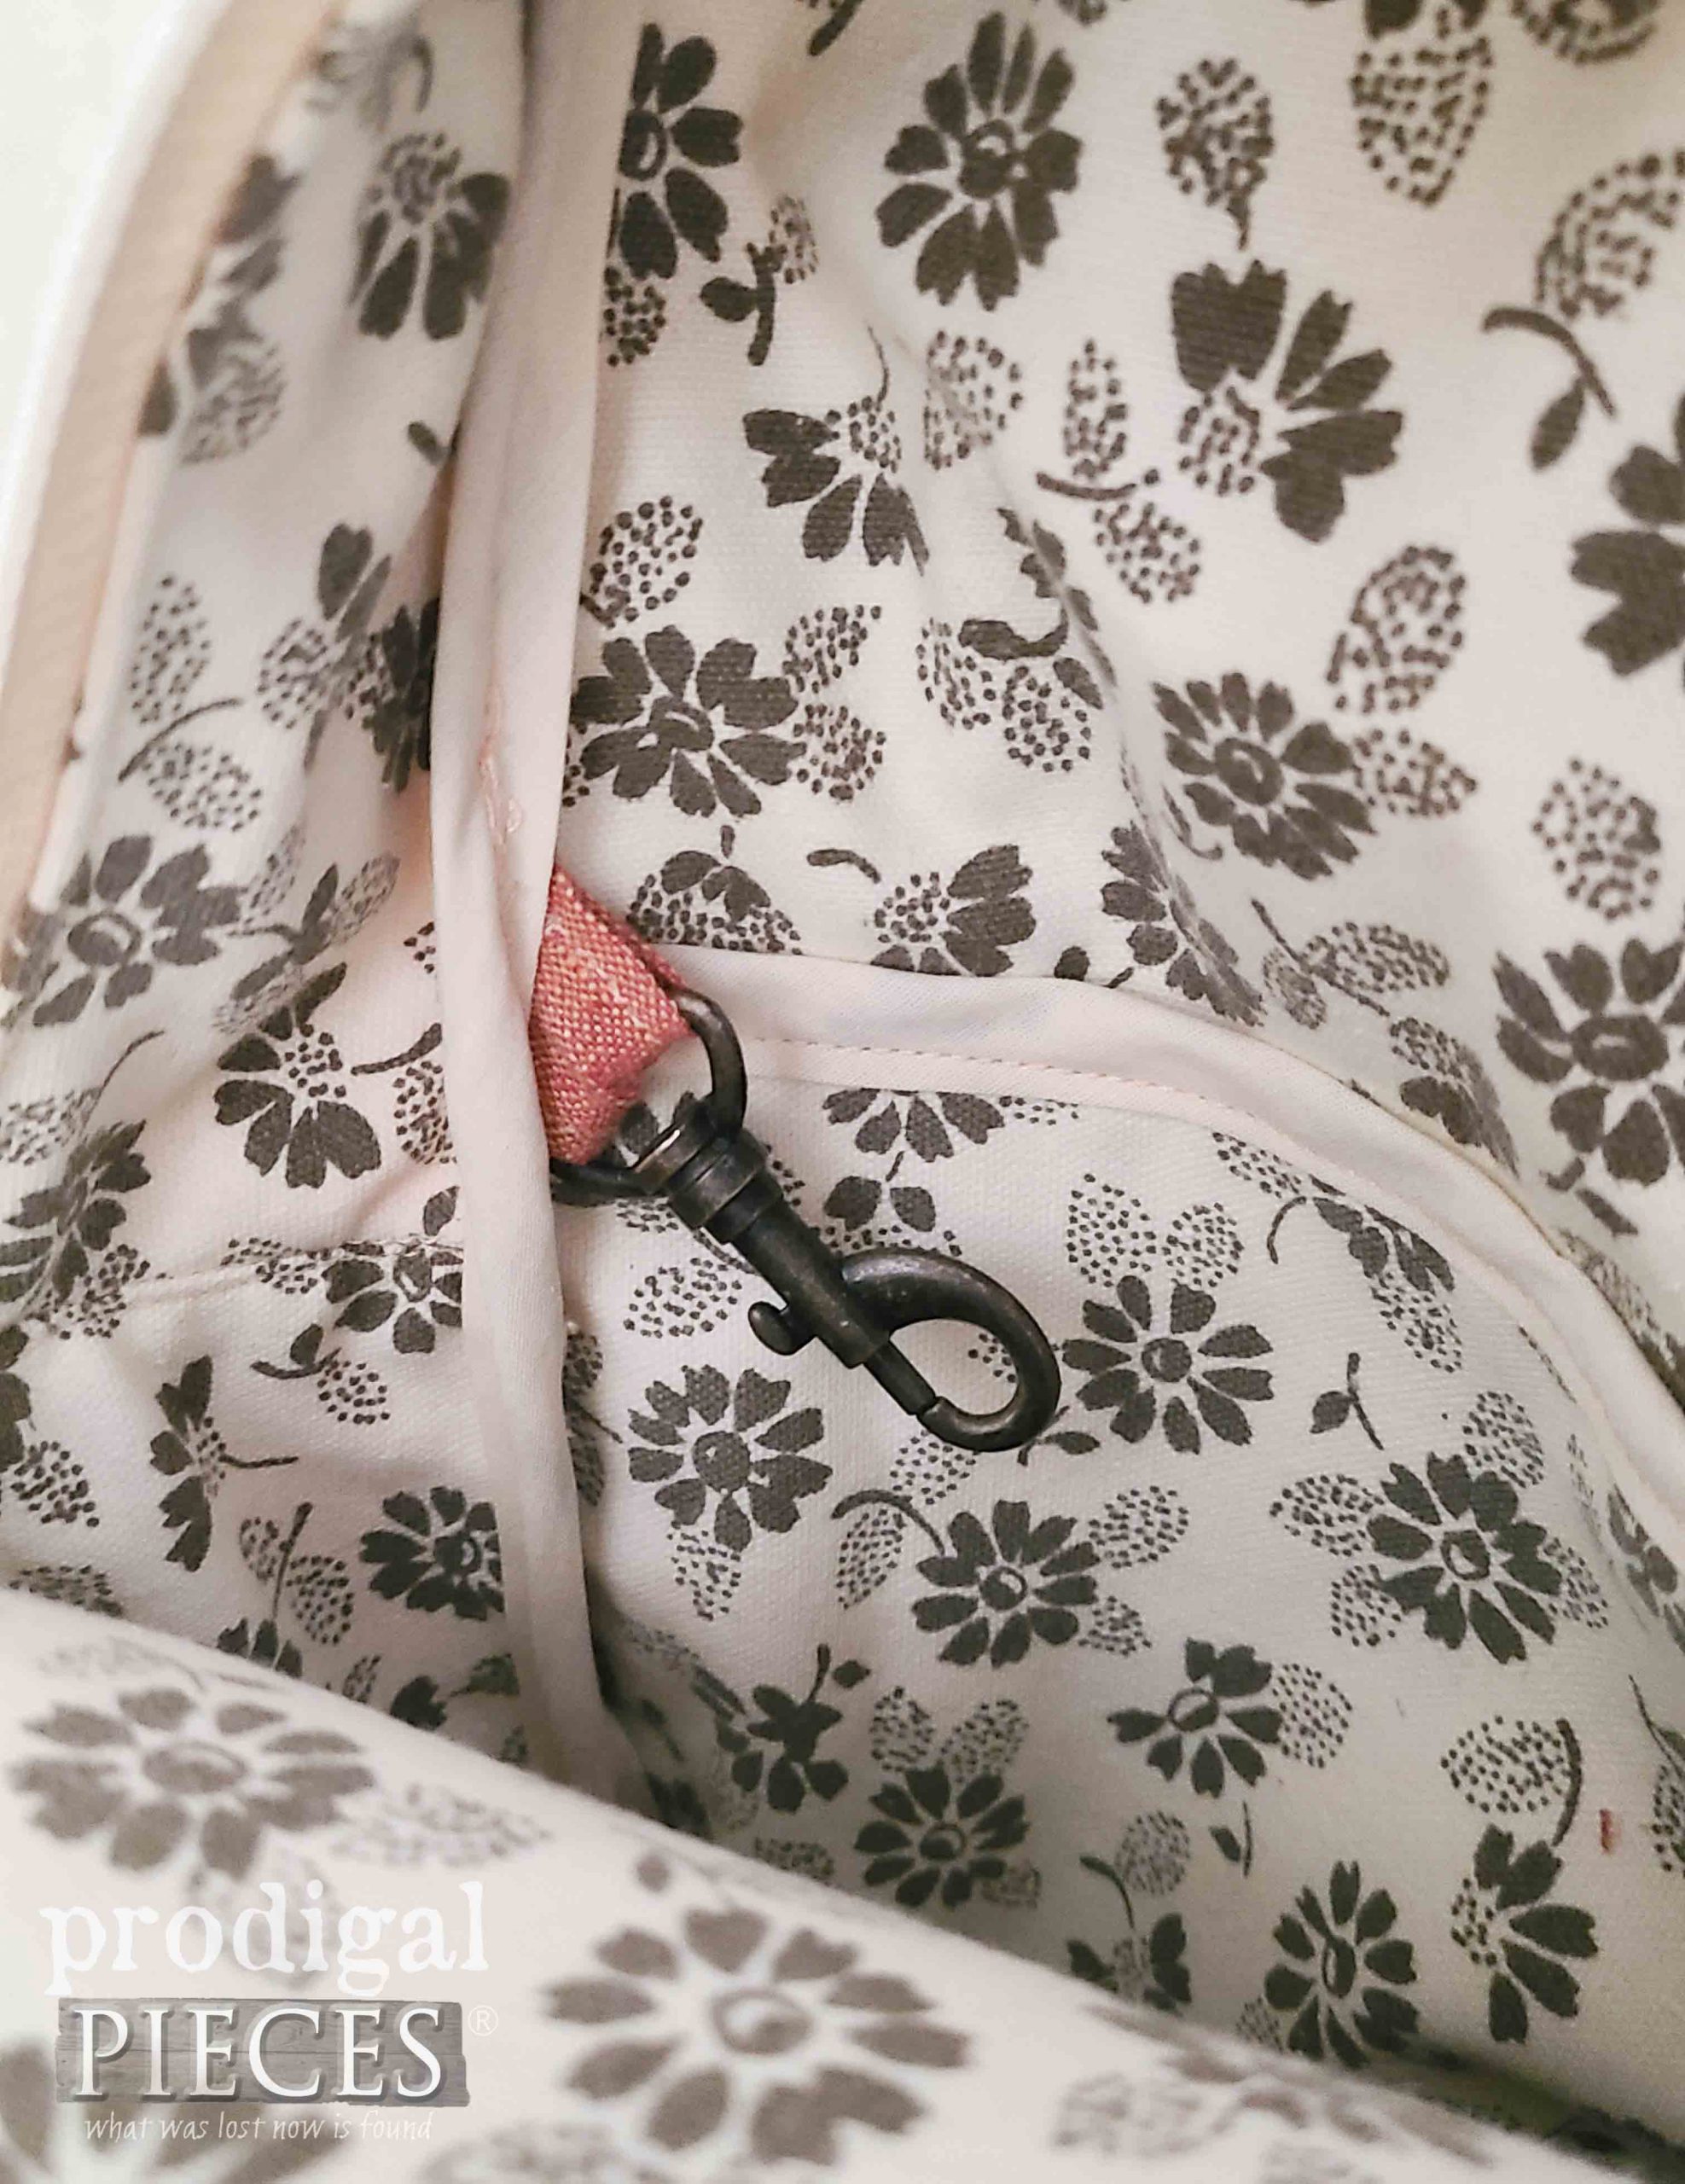 Keychain Hook in Linen Sling Bag by Larissa of Prodigal Pieces | prodigalpieces.com #prodigalpieces #fashion #diy #style